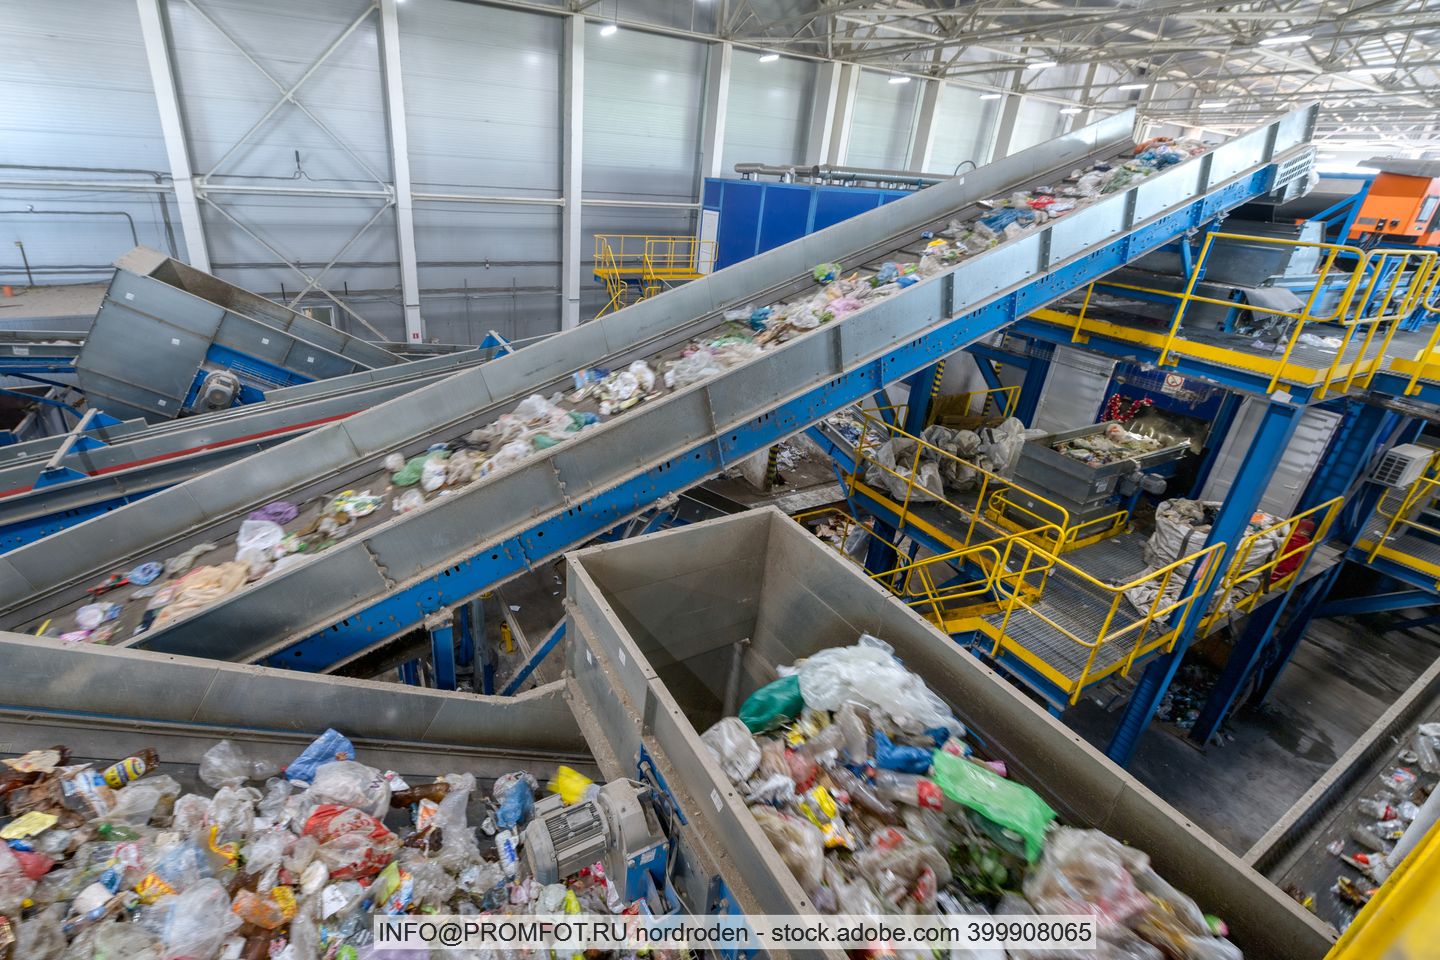 Conveyor belts running in a sorting plant for packaging waste